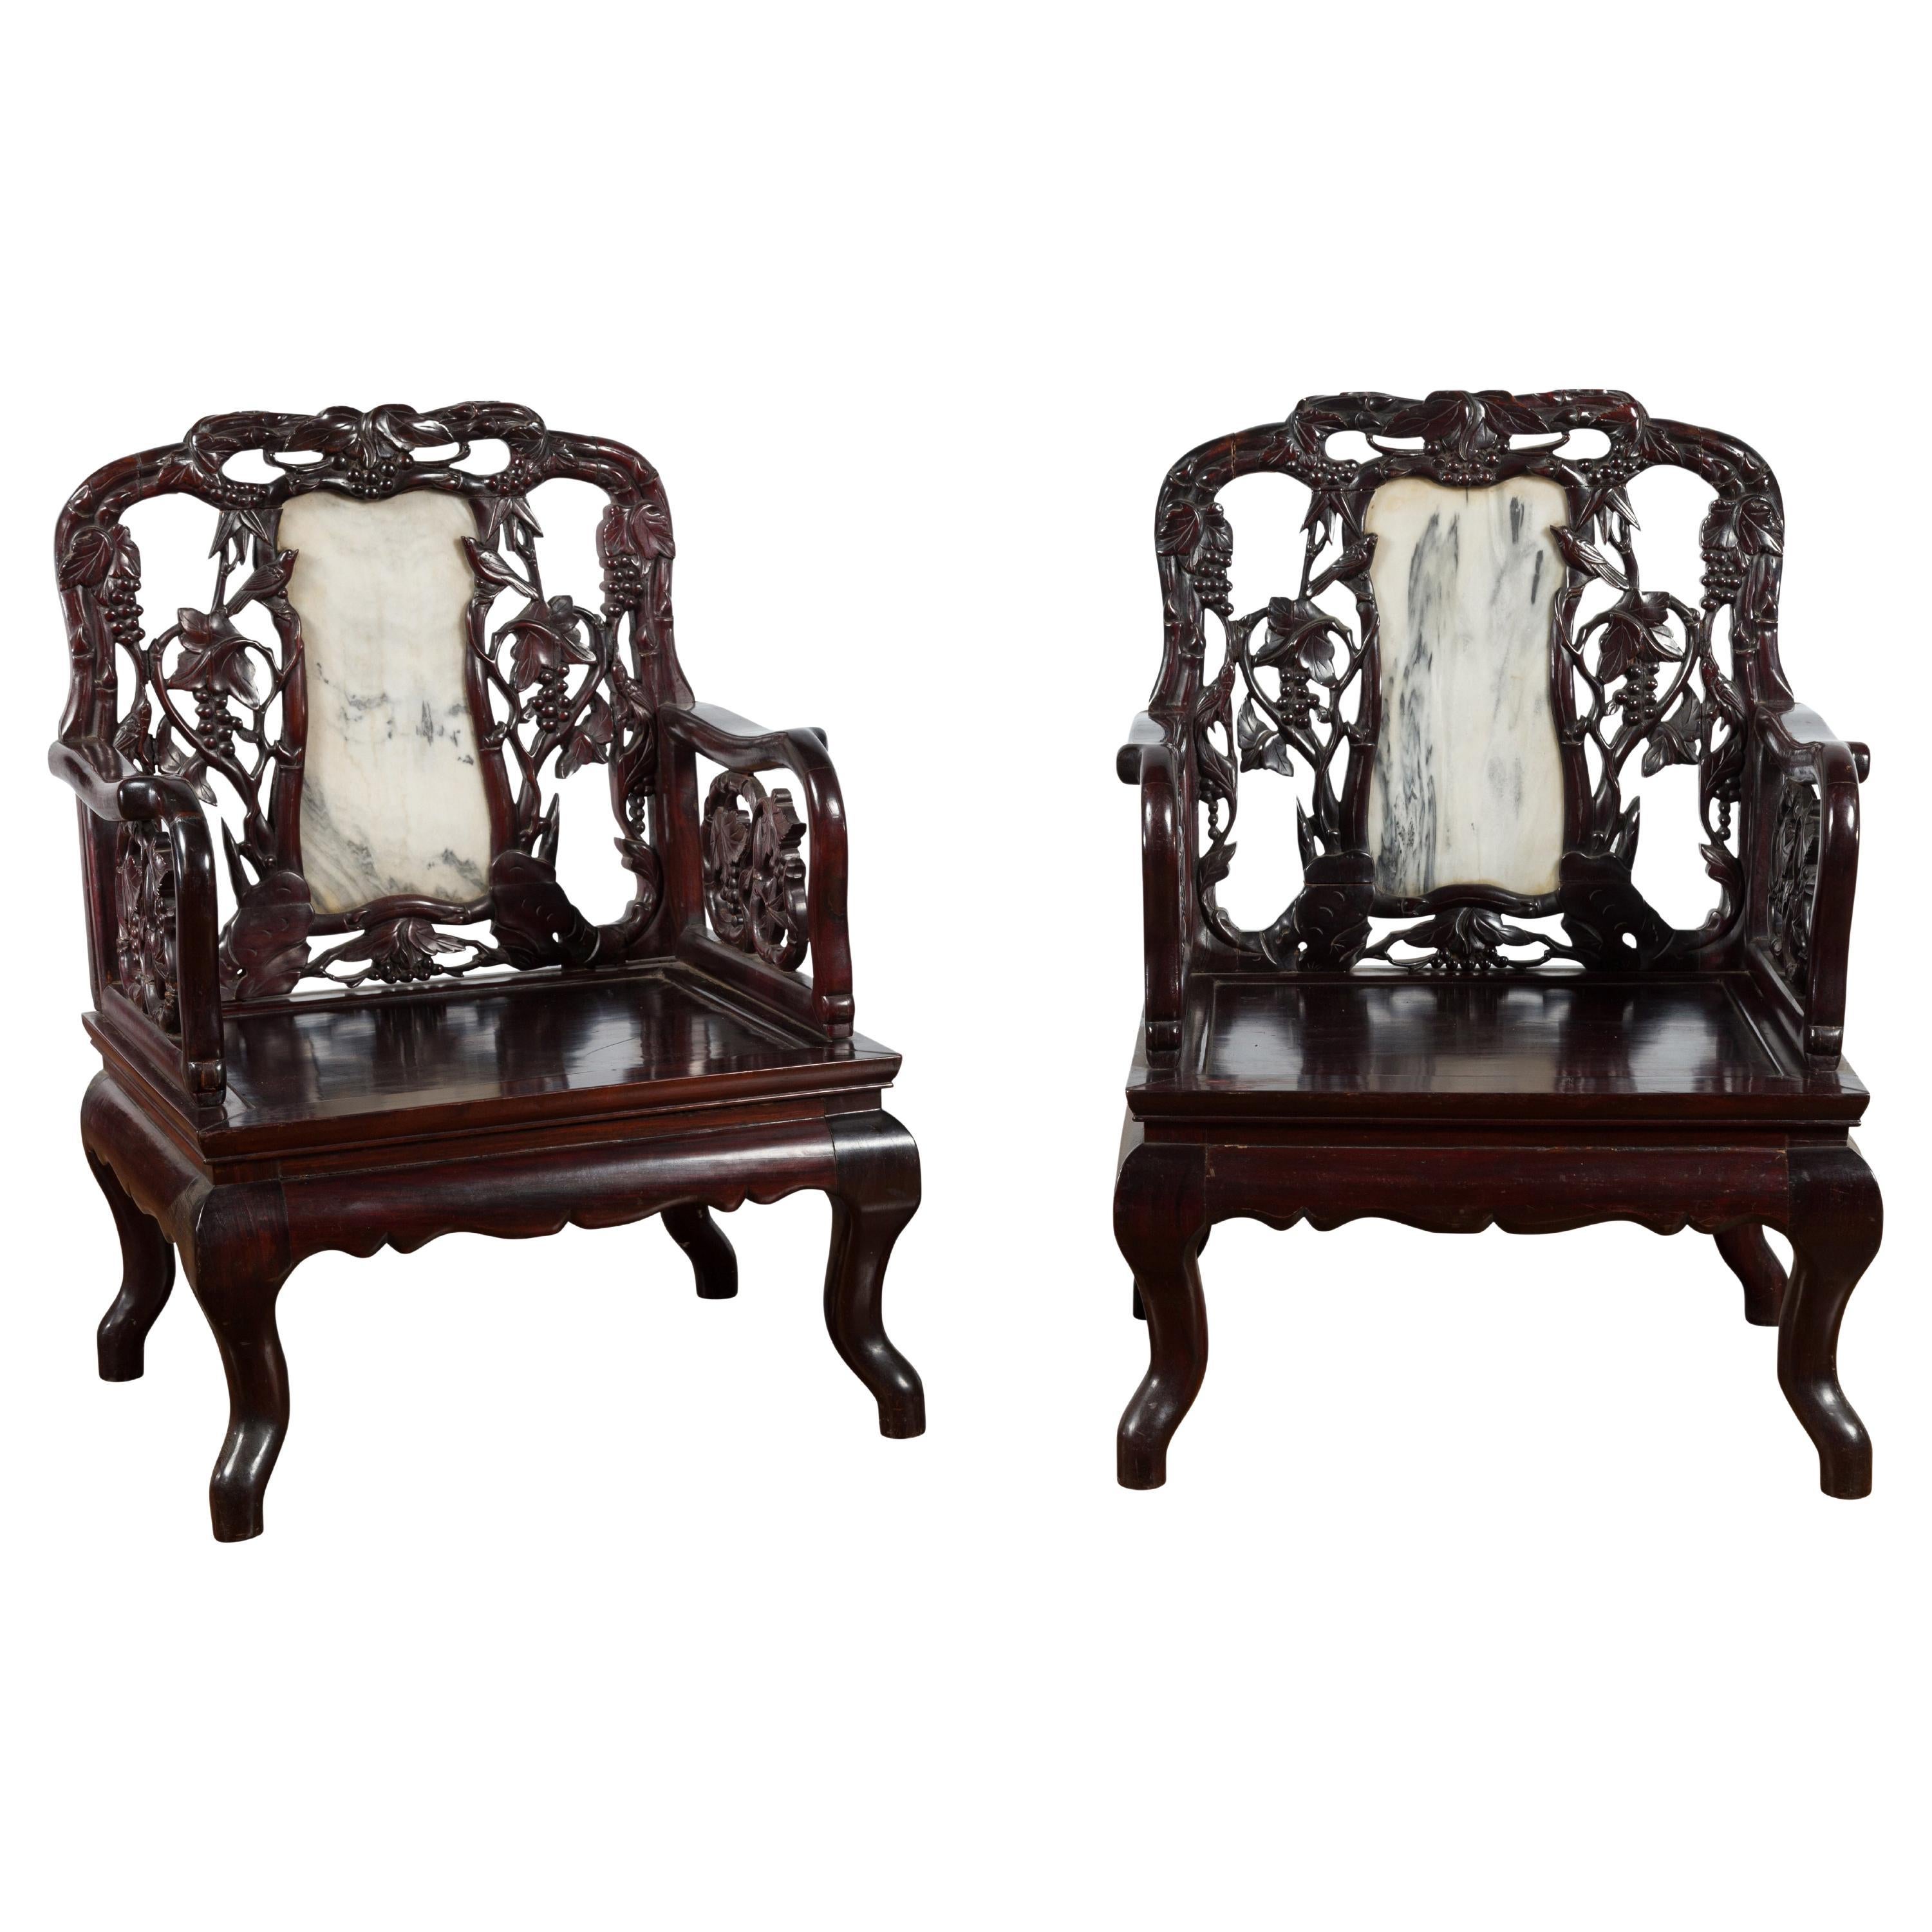 Pair of Chinese Hand Carved Rosewood Armchairs with Marble Splat and Dark Patina For Sale